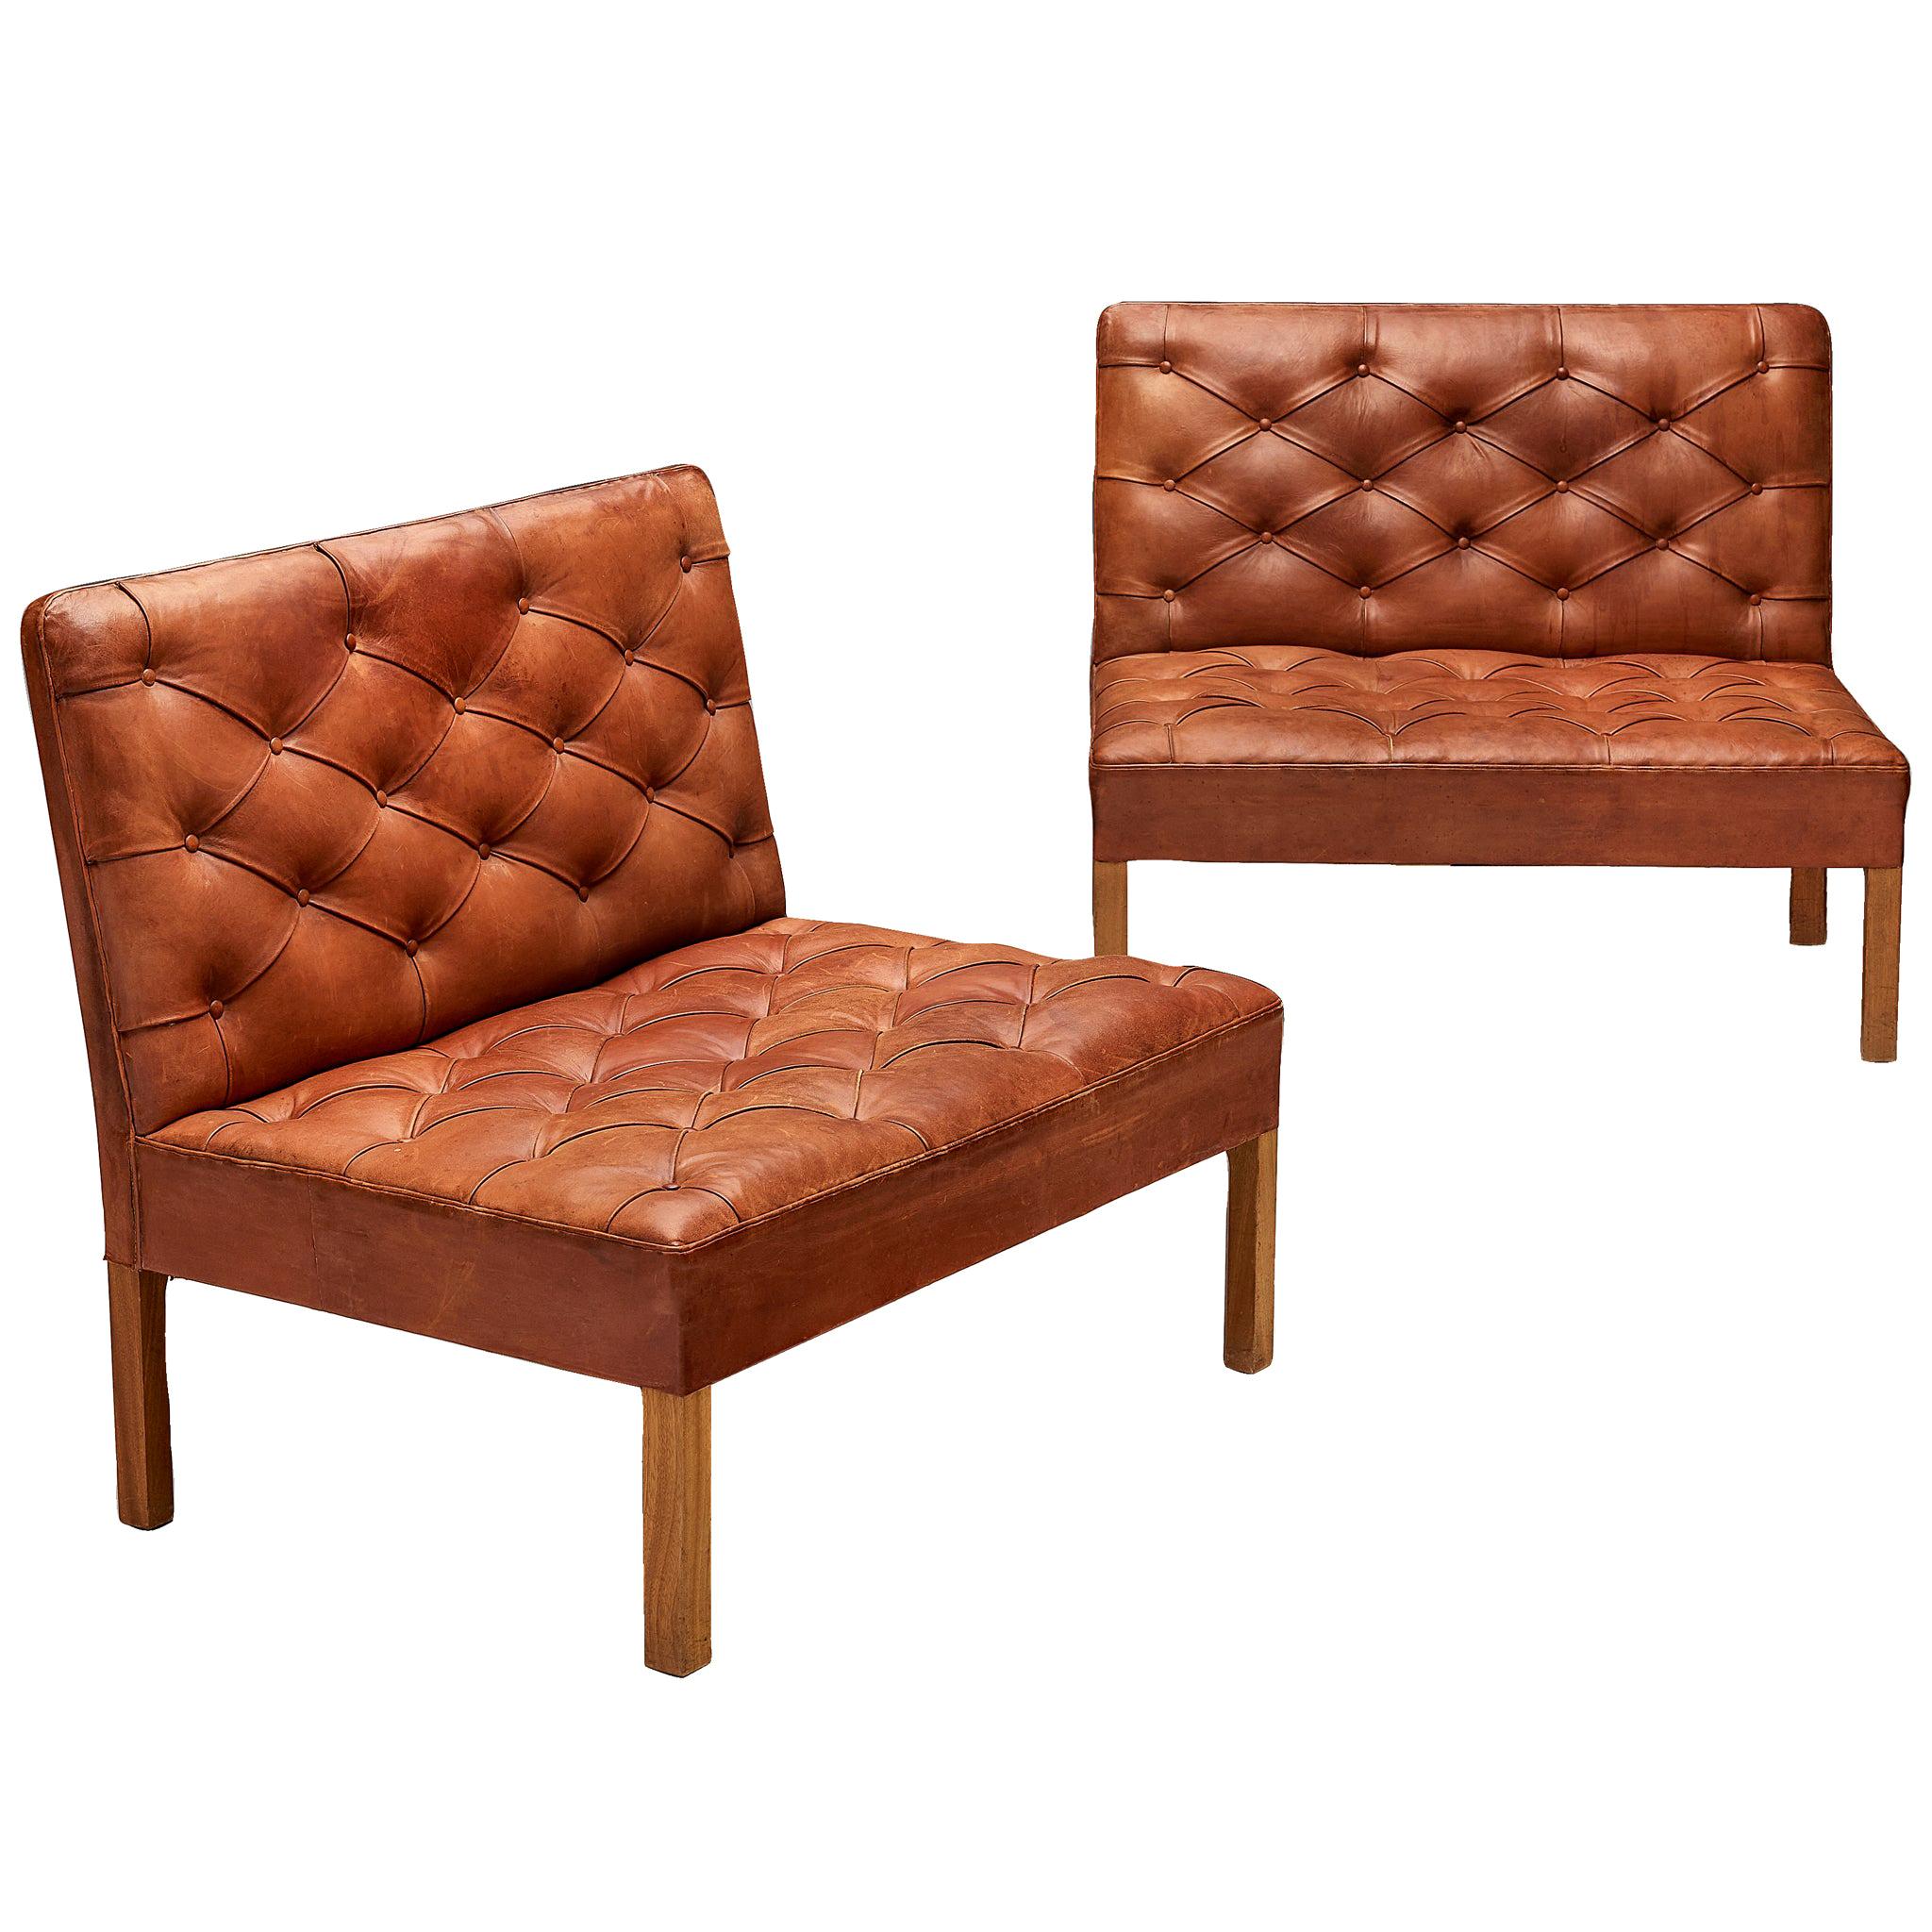 Kaare Klint 'Addition' Pair of Lounge Chairs Original Red Leather